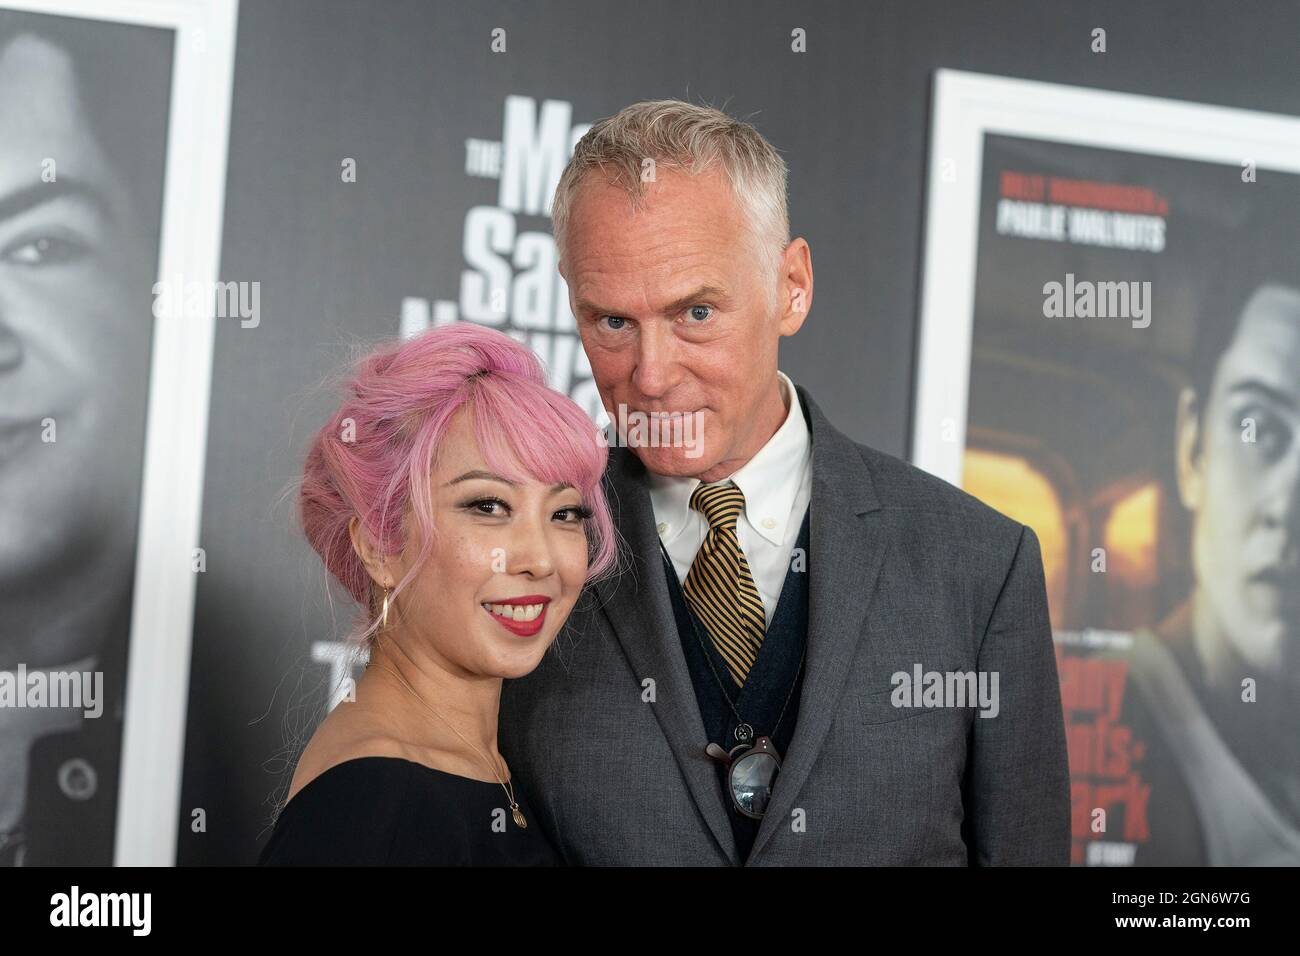 Alan Taylor (R) attend premiere of The Many Saints of Newark movie at Beacon Theatre. (Photo by Lev Radin/Pacific Press) Stock Photo